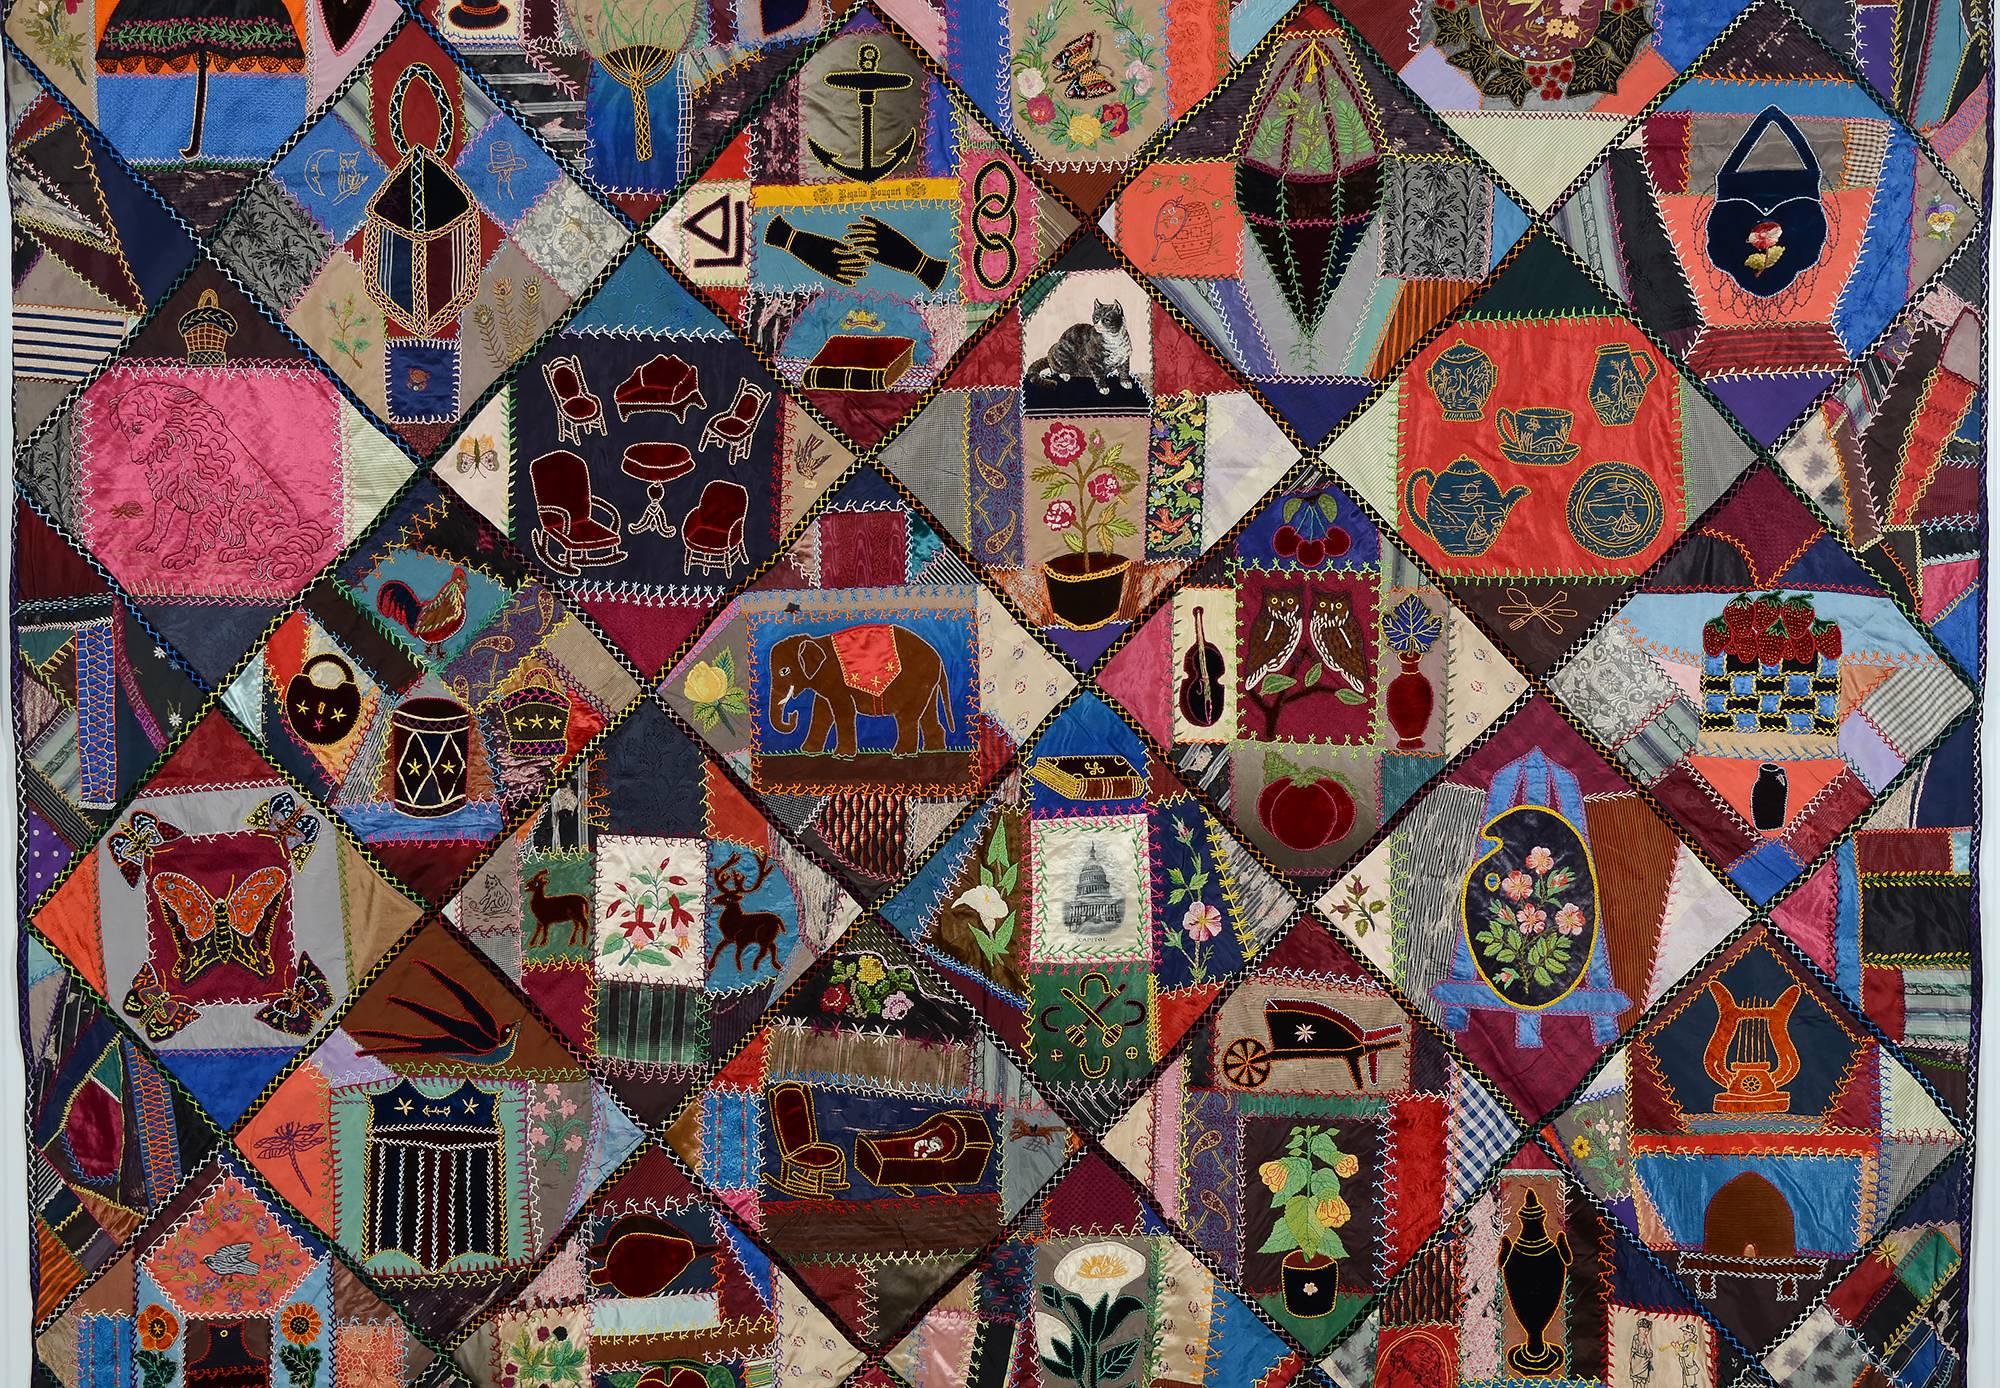 This contained crazy quilt has an extraordinary variety of appliqued and embroidered images. Animals include an elephant; deer; rooster; dog; cat; and horse.
It has a patriotic shield; eagle and flags. A printed image of the U.S. Capitol is in the